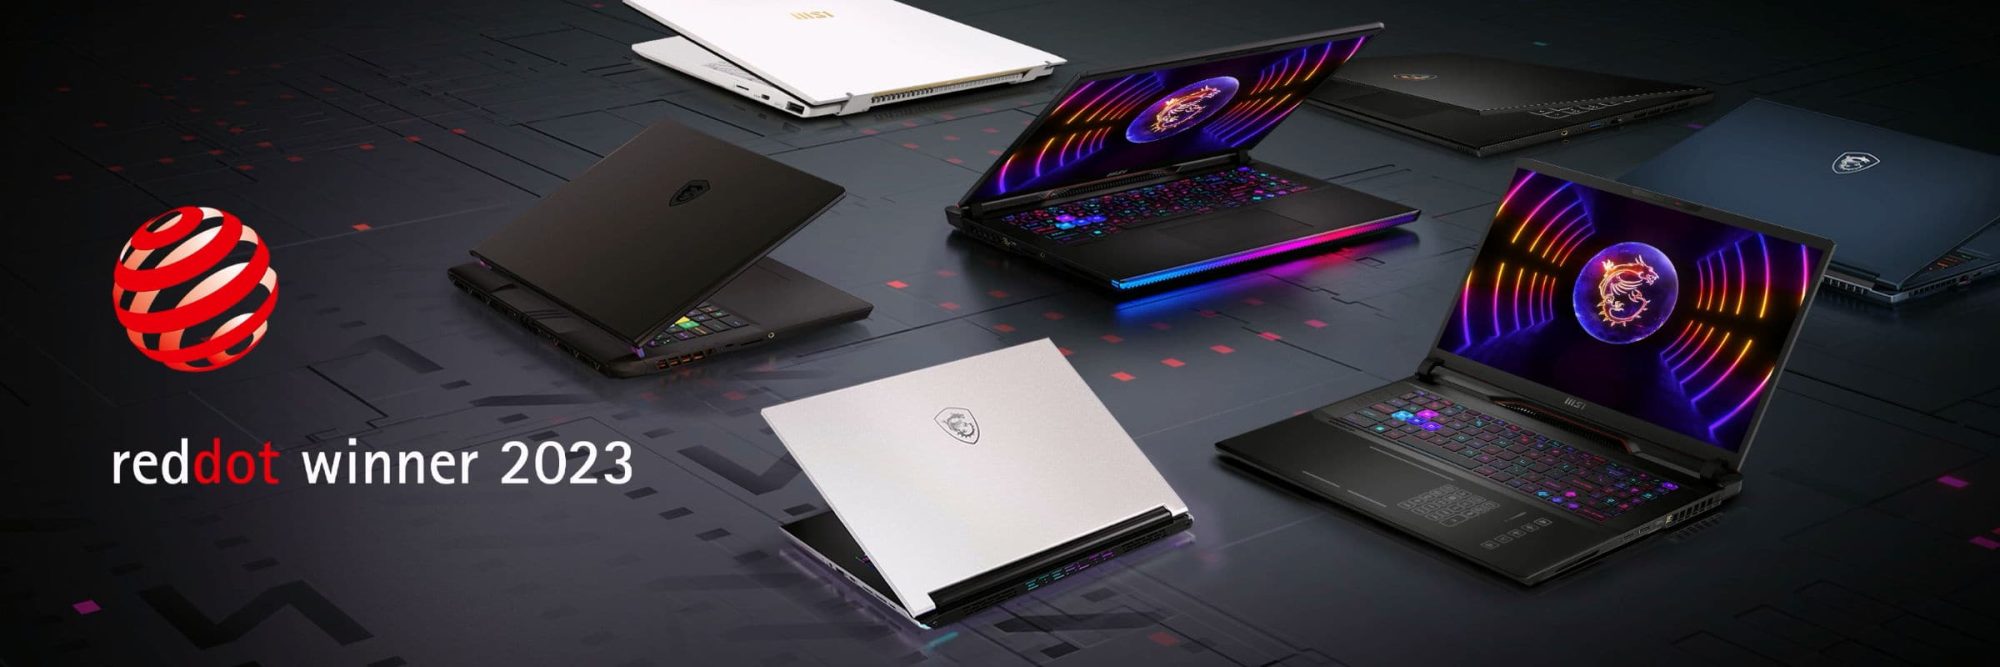 MSI announces its Mercedes-AMG limited edition co-branded laptop